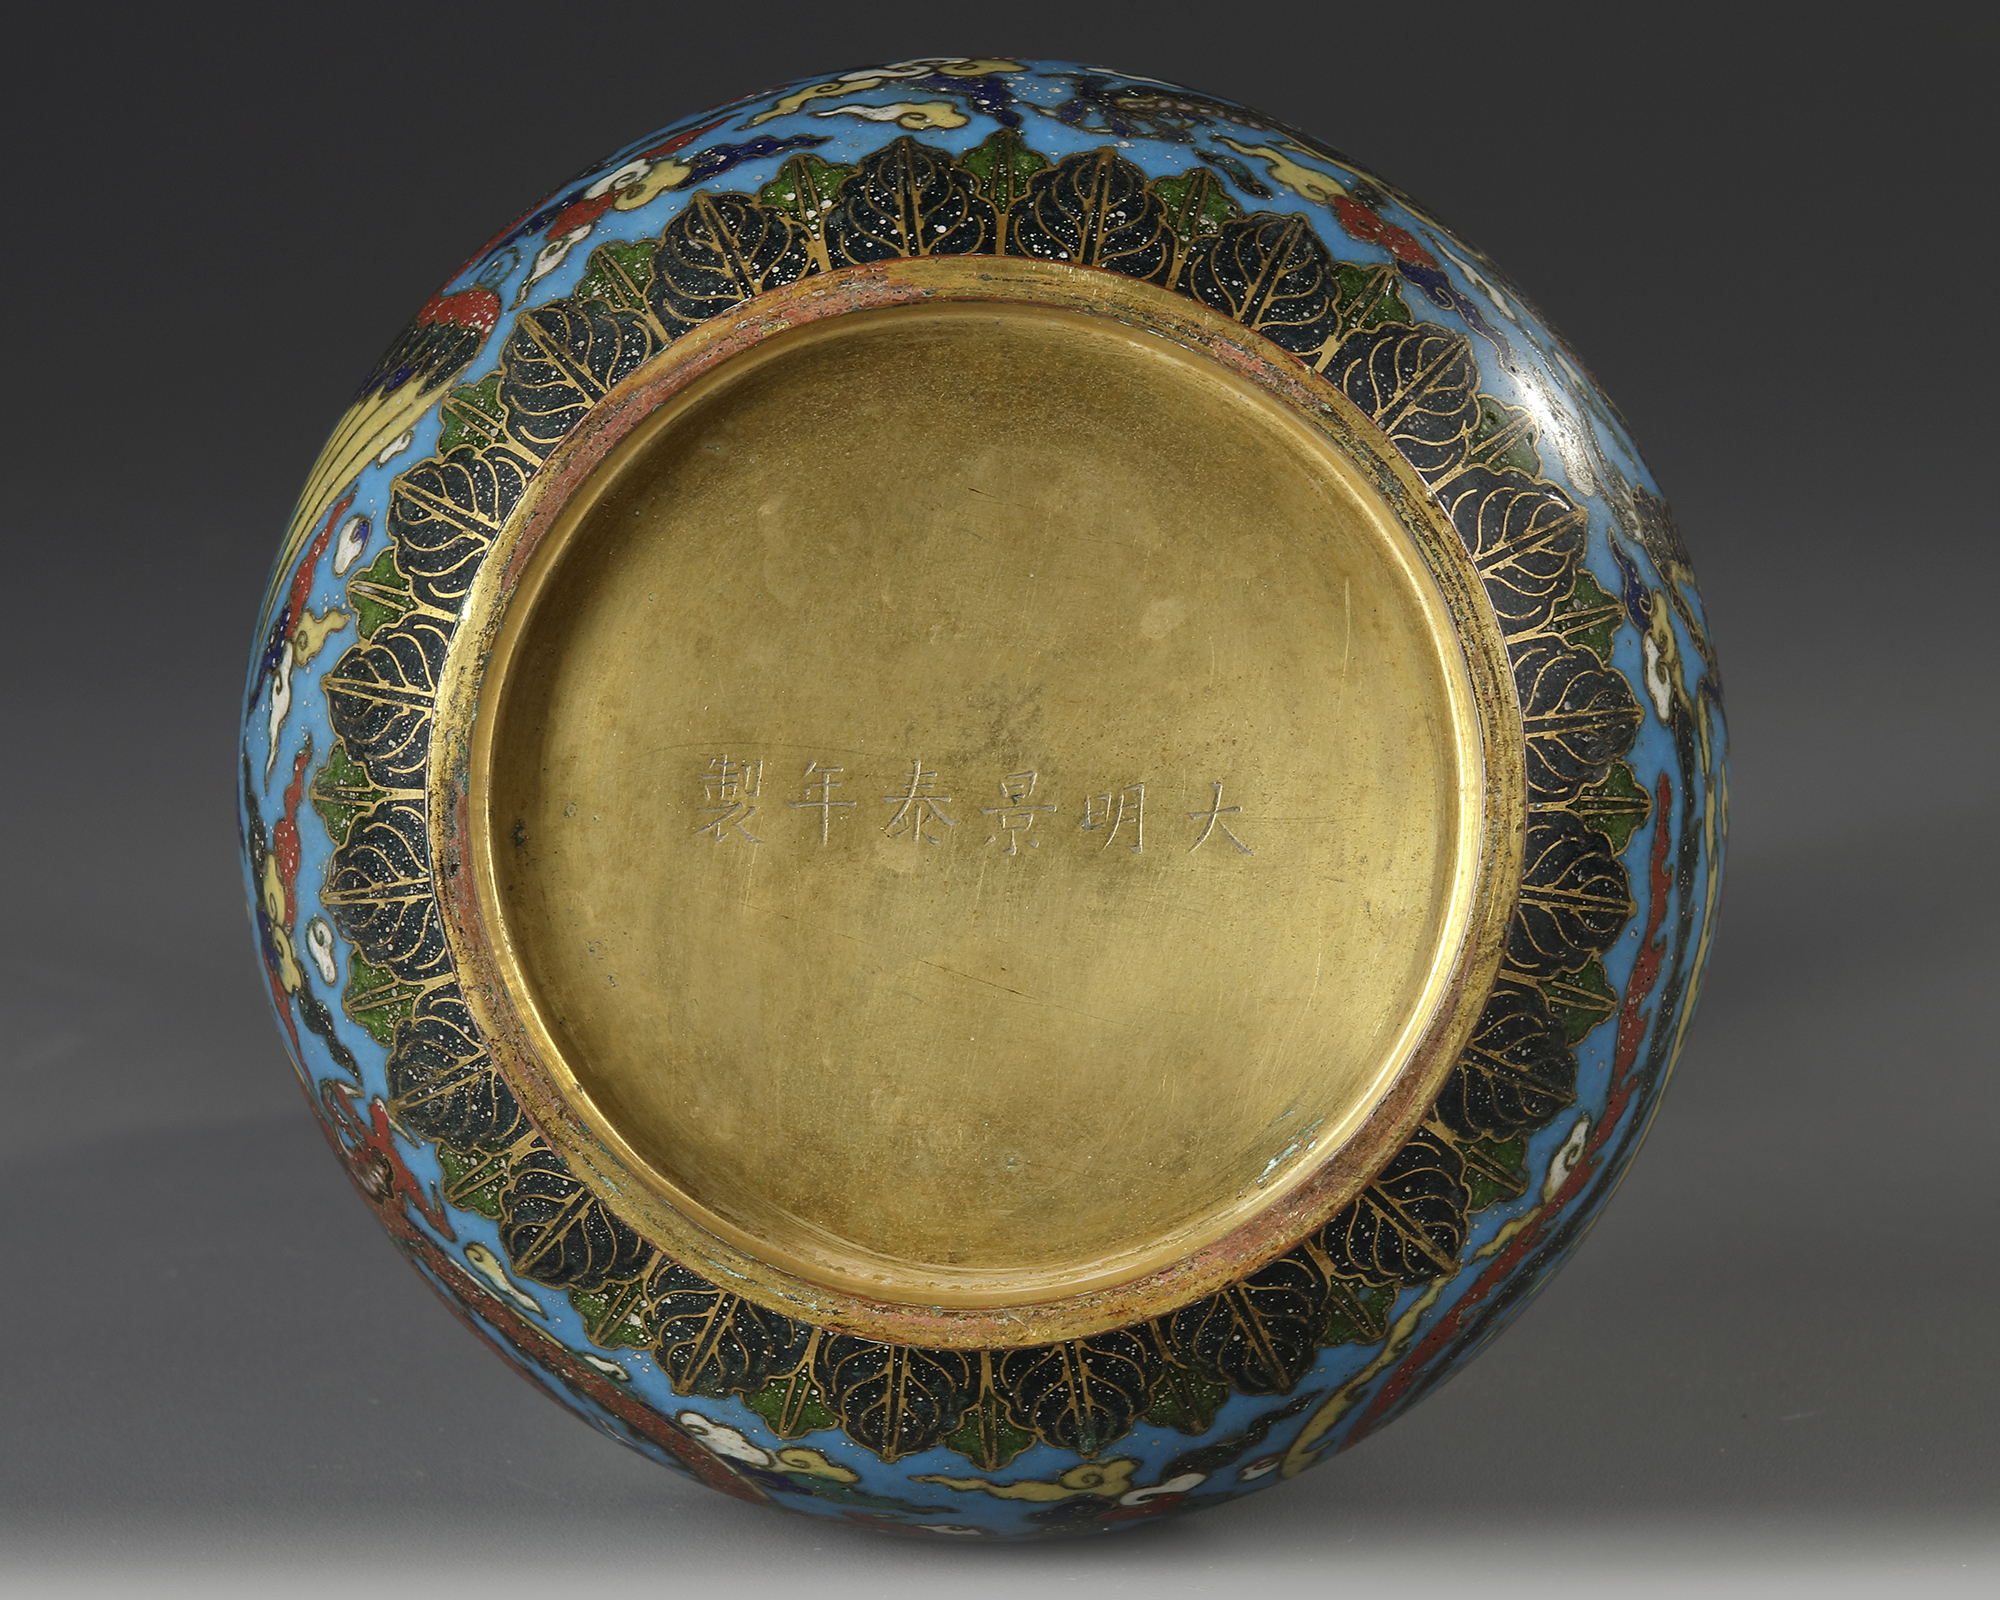 A CHINESE CLOISONNÉ ENAMEL GARLIC HEAD VASE, JINGTAI INCISED SIX-CHARACTER MARK IN A LINE (1450-1456 - Image 4 of 5